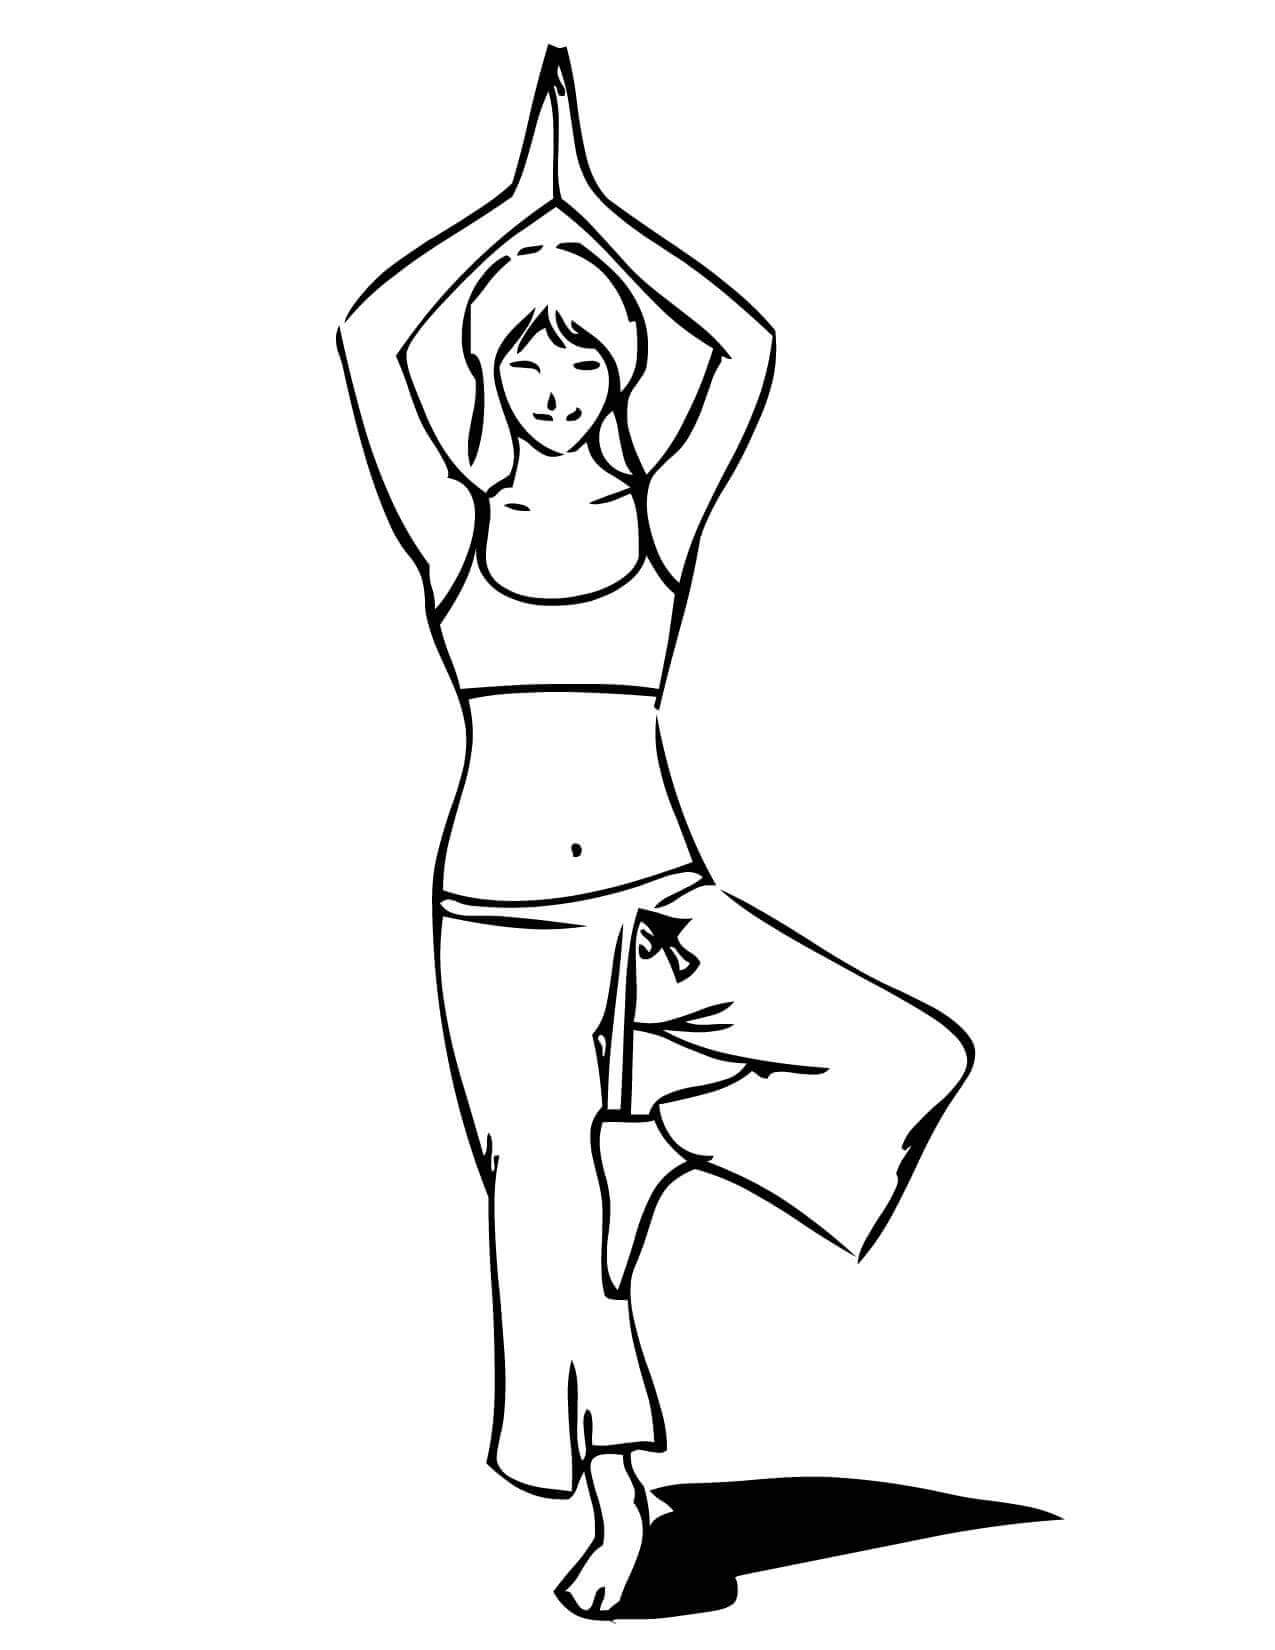 International Yoga Day Coloring Pages